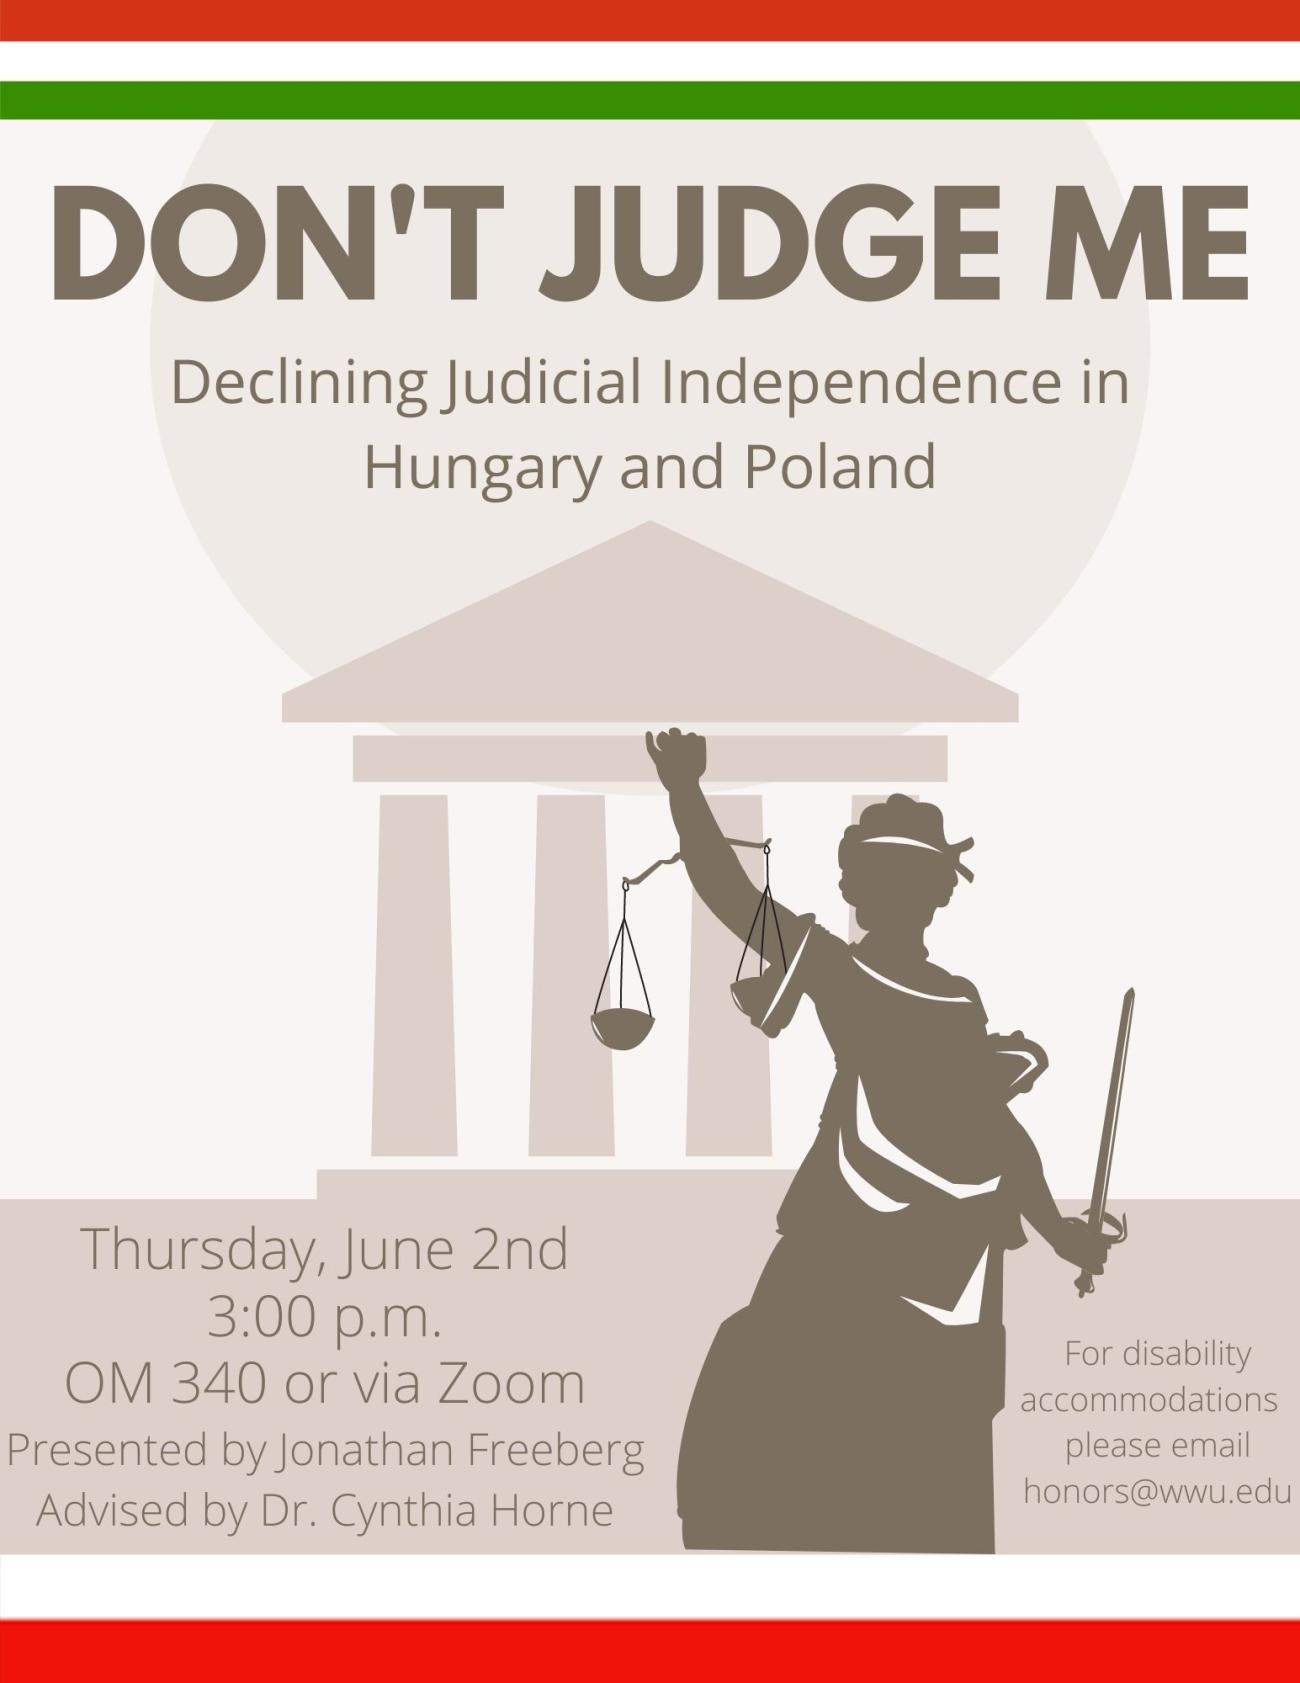 A poster with a silhouetted courthouse, an angel statue with scales, and extended Hungarian and Polish flags border the top and bottom of the poster respectively. The text reads: "Don't Judge Me: Declining Judicial Independence in Hungary and Poland. Thursday, June 2nd. 3:00 p.m. OM 340 or via Zoom. Presented by Jonathan Freeberg, Advised by Dr. Cynthia Horne. For disability accommodations, please email honors@wwu.edu."